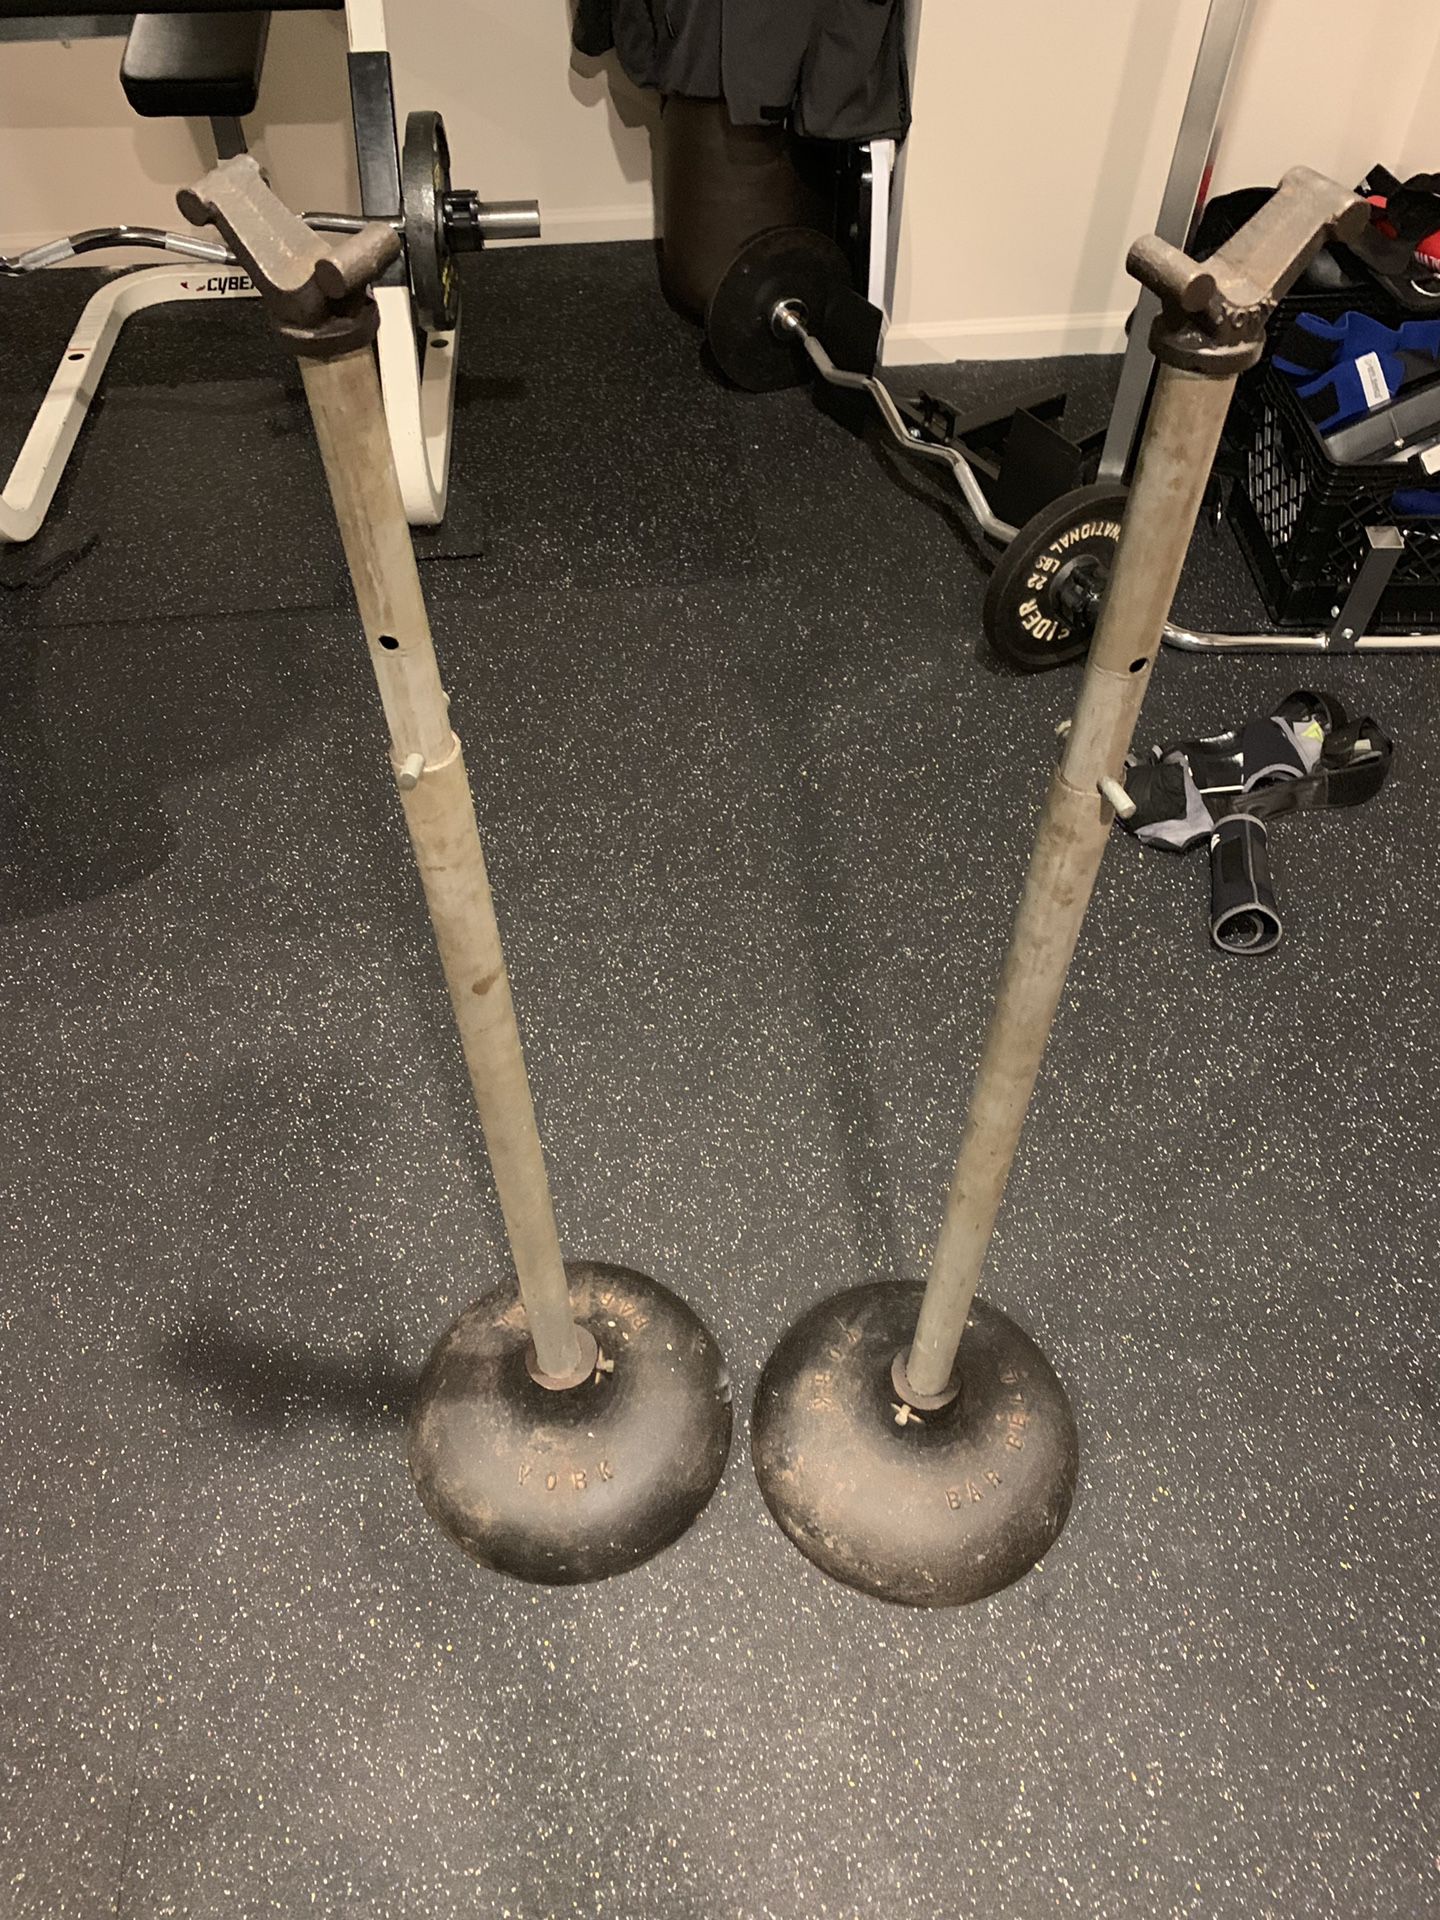 York Barbell Spotting Stands